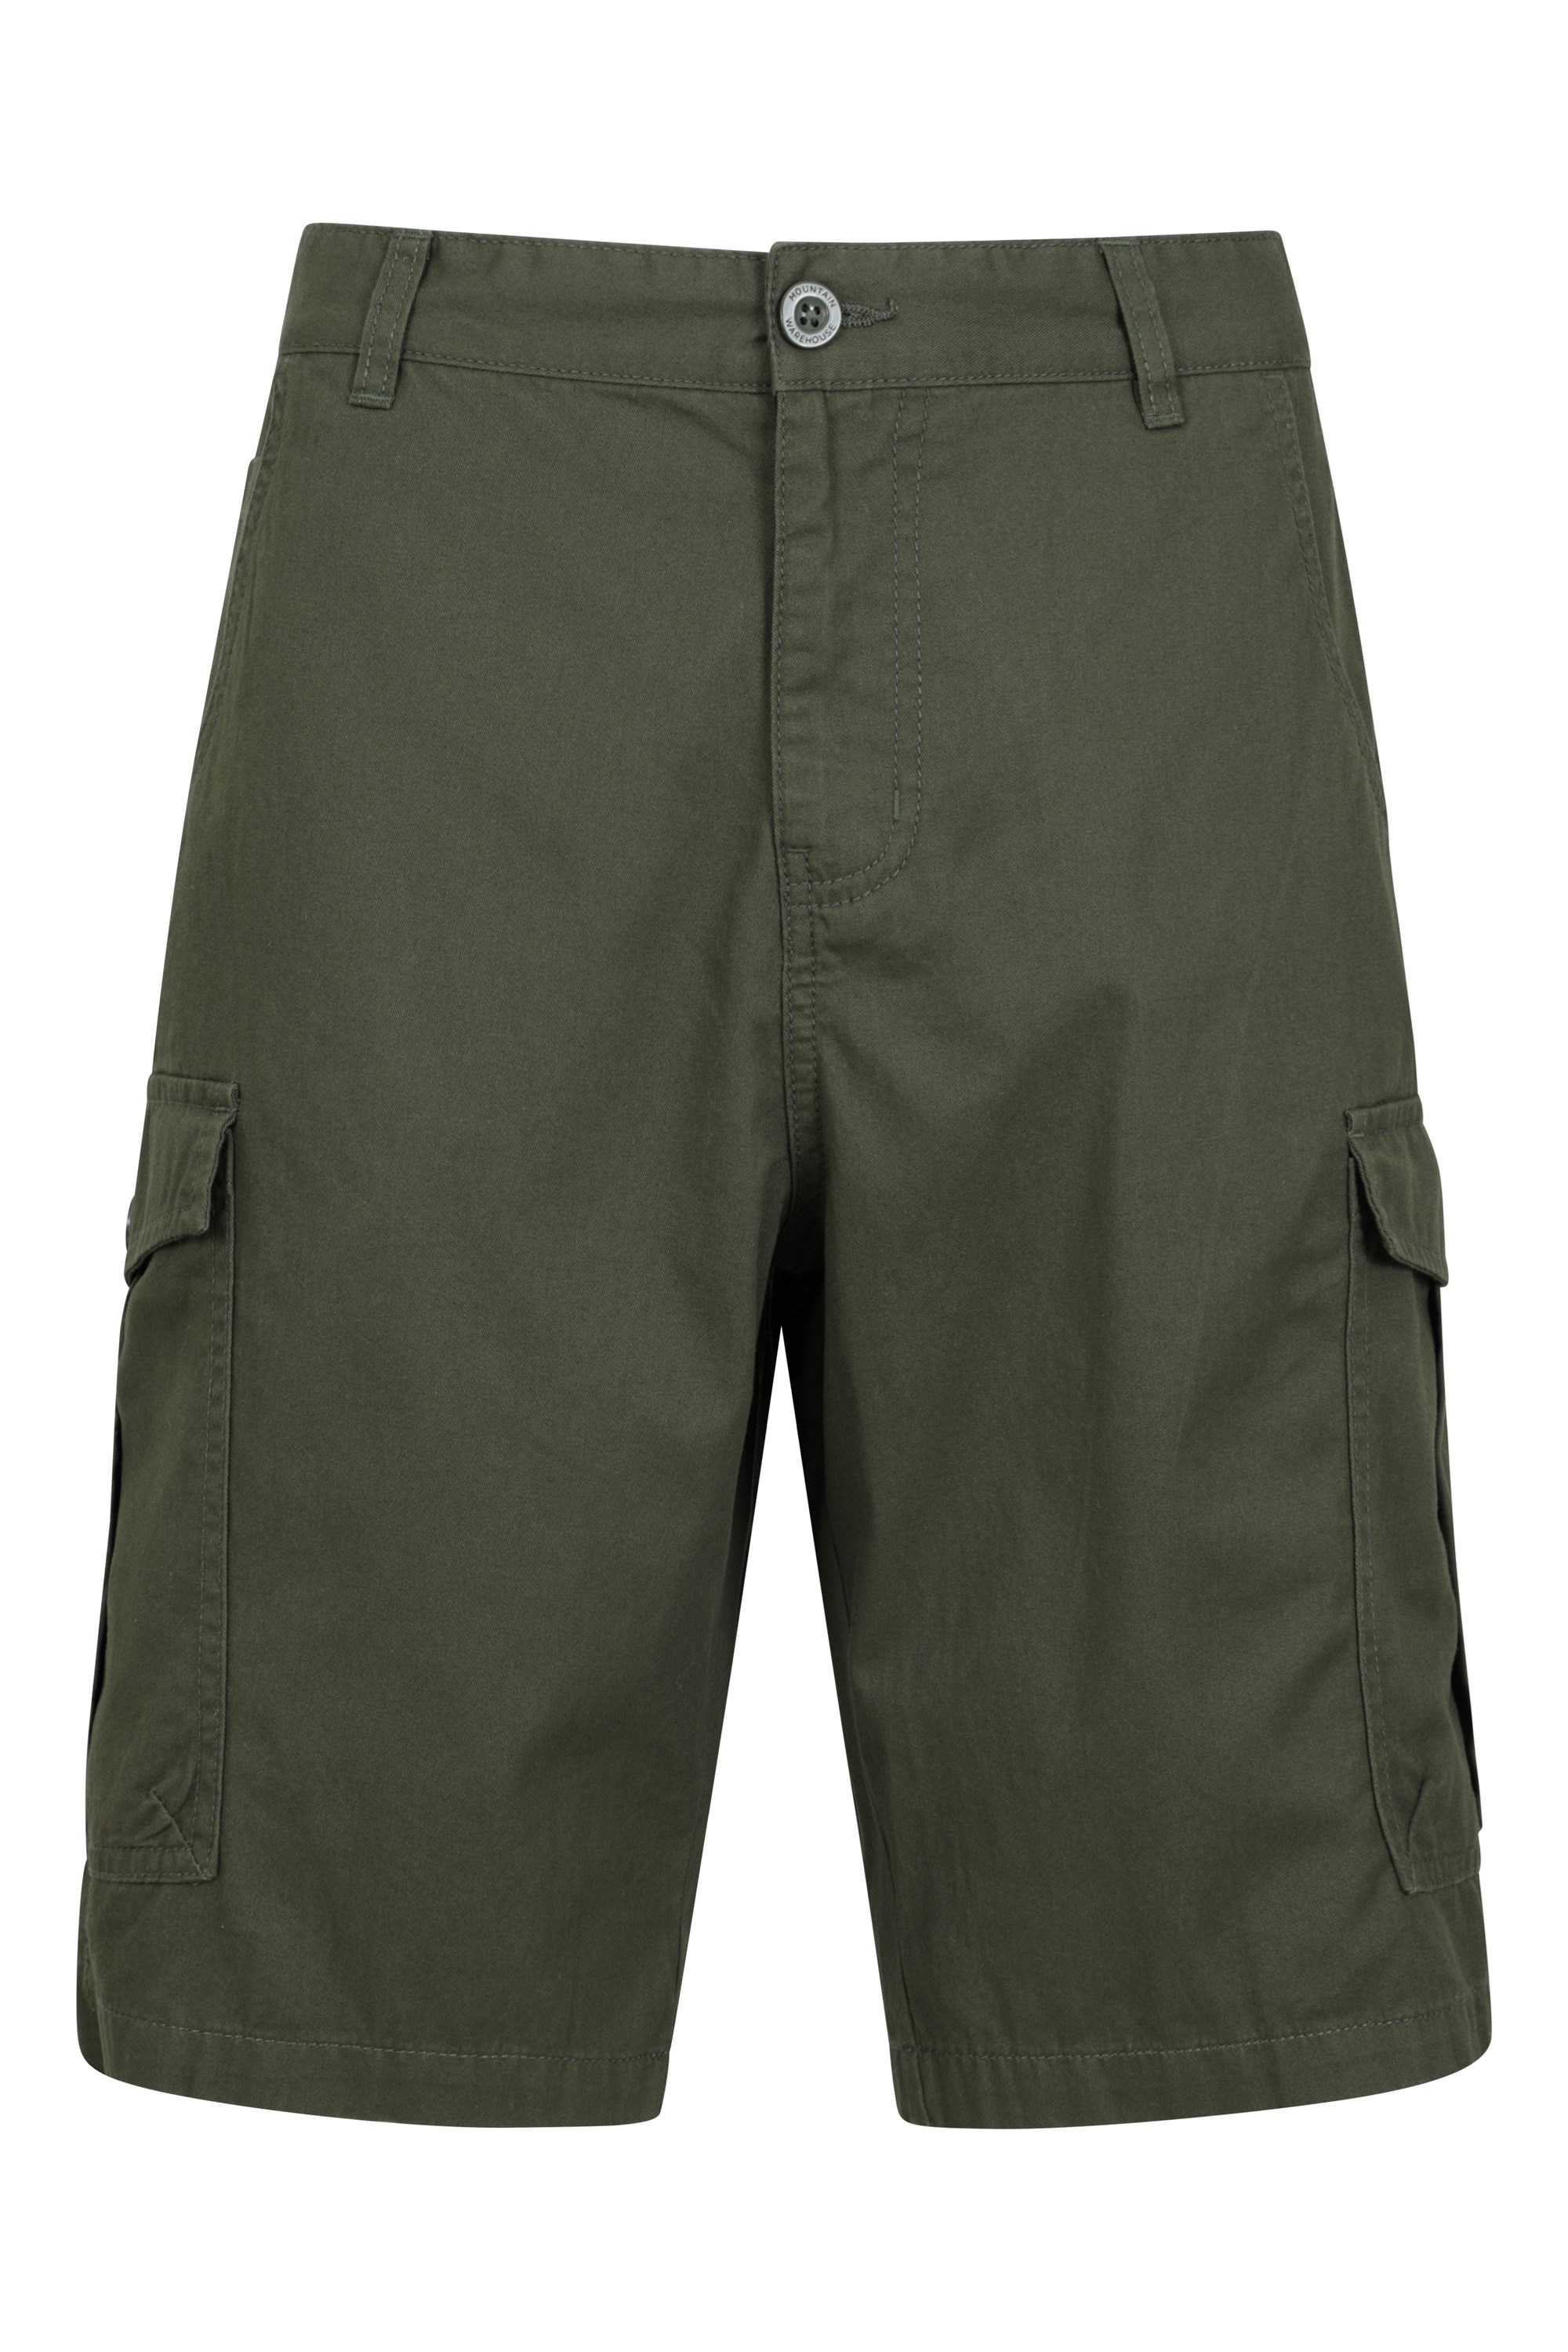 Mens Outdoor Cargo Shorts Waterproof Casual Shorts with Belt